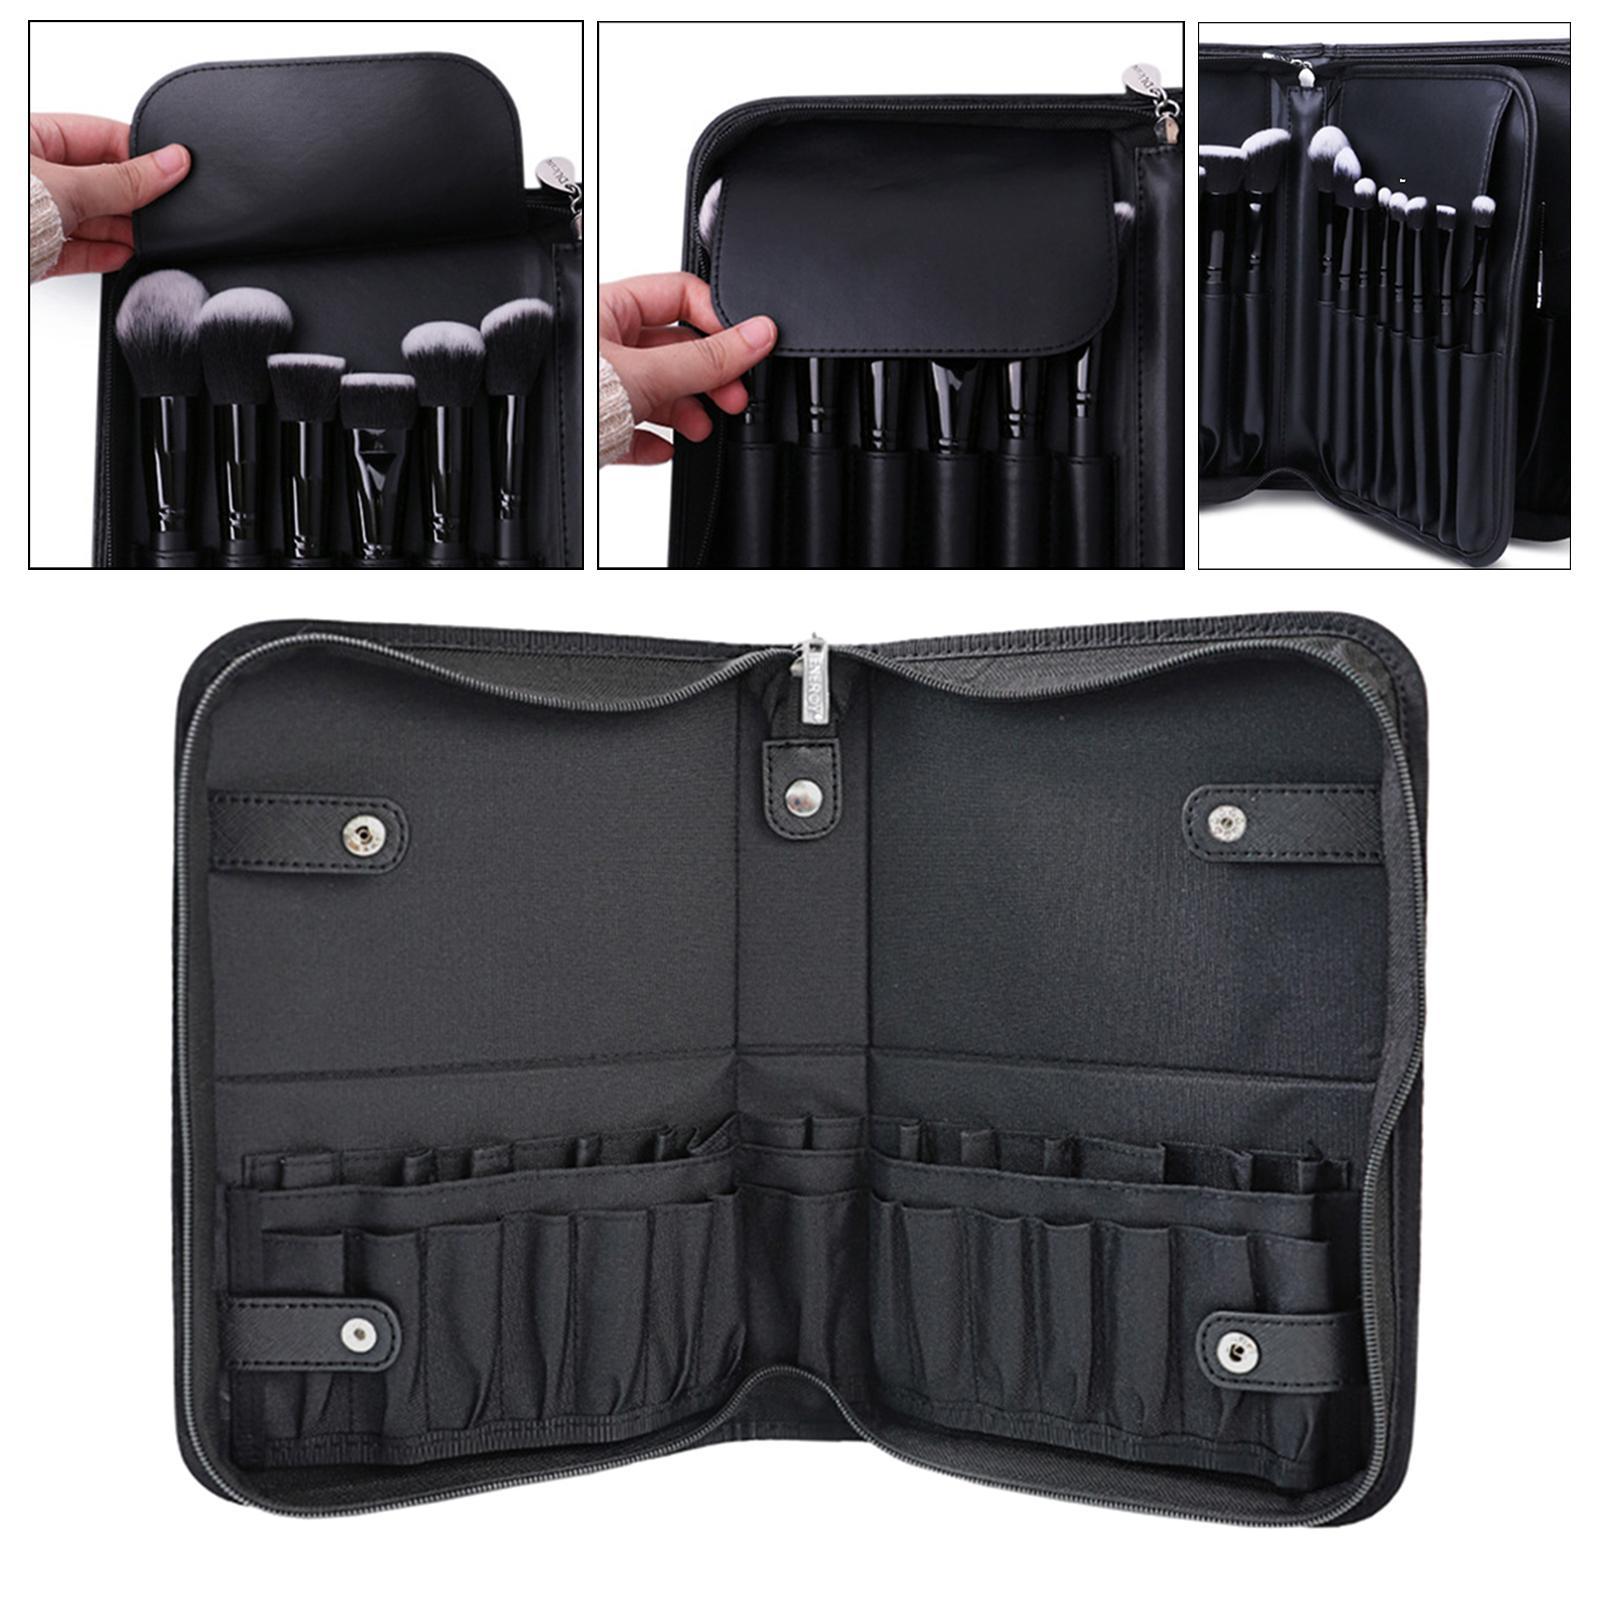 Makeup Brushes Organizer Bag Cosmetic Bag Pouch Carrying Bag for Home Use